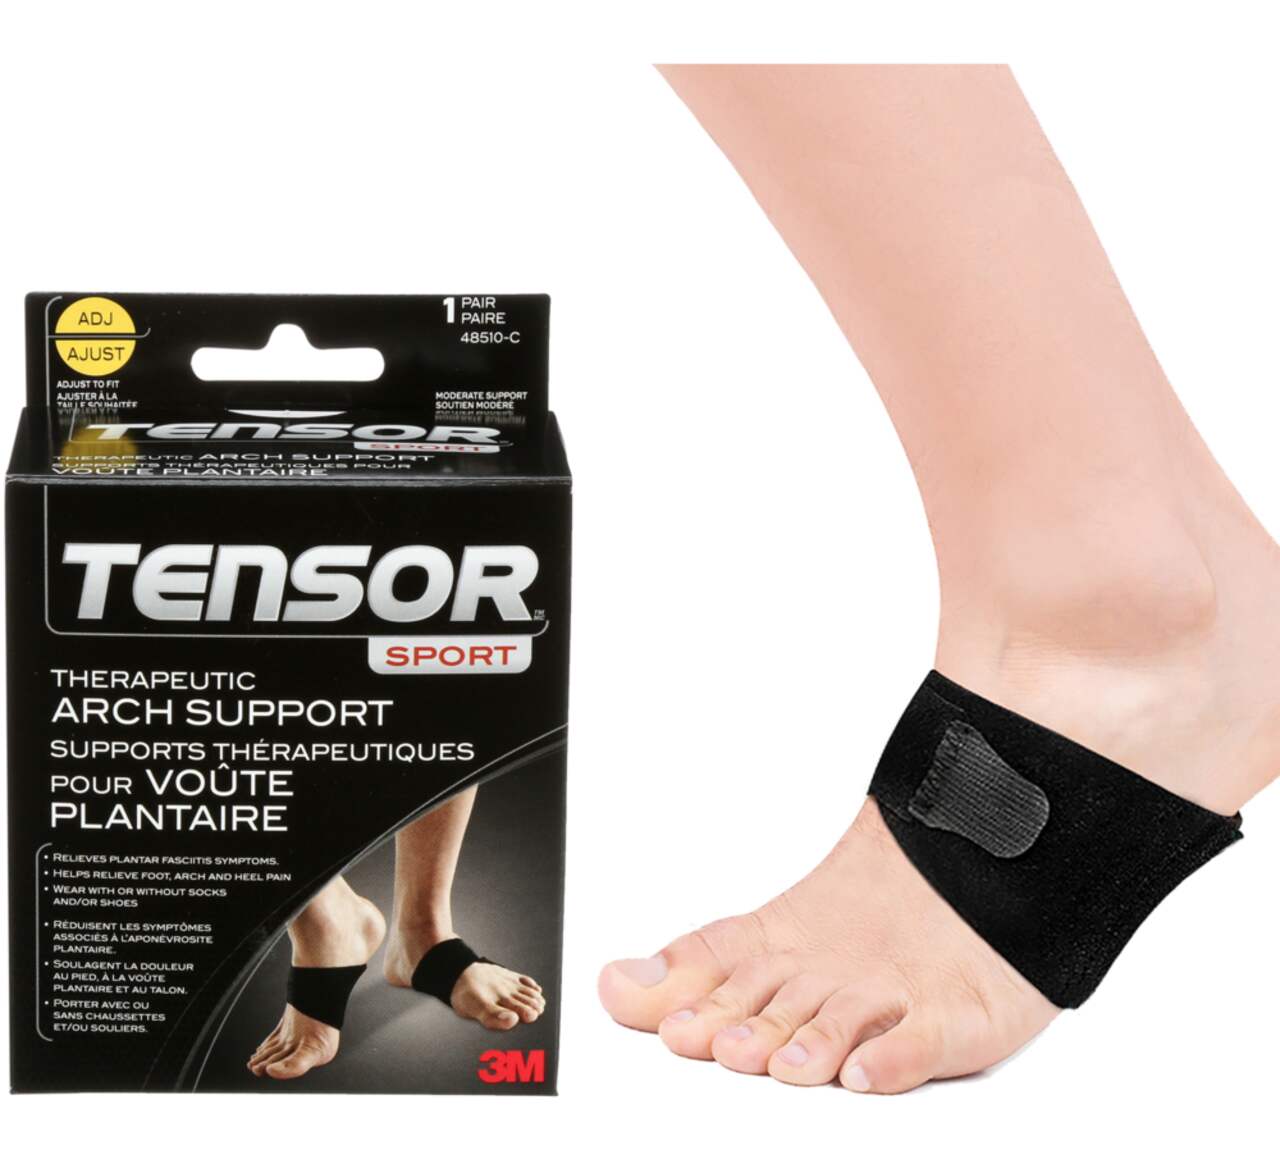 https://media-www.canadiantire.ca/product/playing/hockey/hockey-accessories/0839163/tensor-therapeutic-arch-support-1dbf16e6-6c5c-48e8-ad4b-f341c71d9583.png?imdensity=1&imwidth=1244&impolicy=mZoom